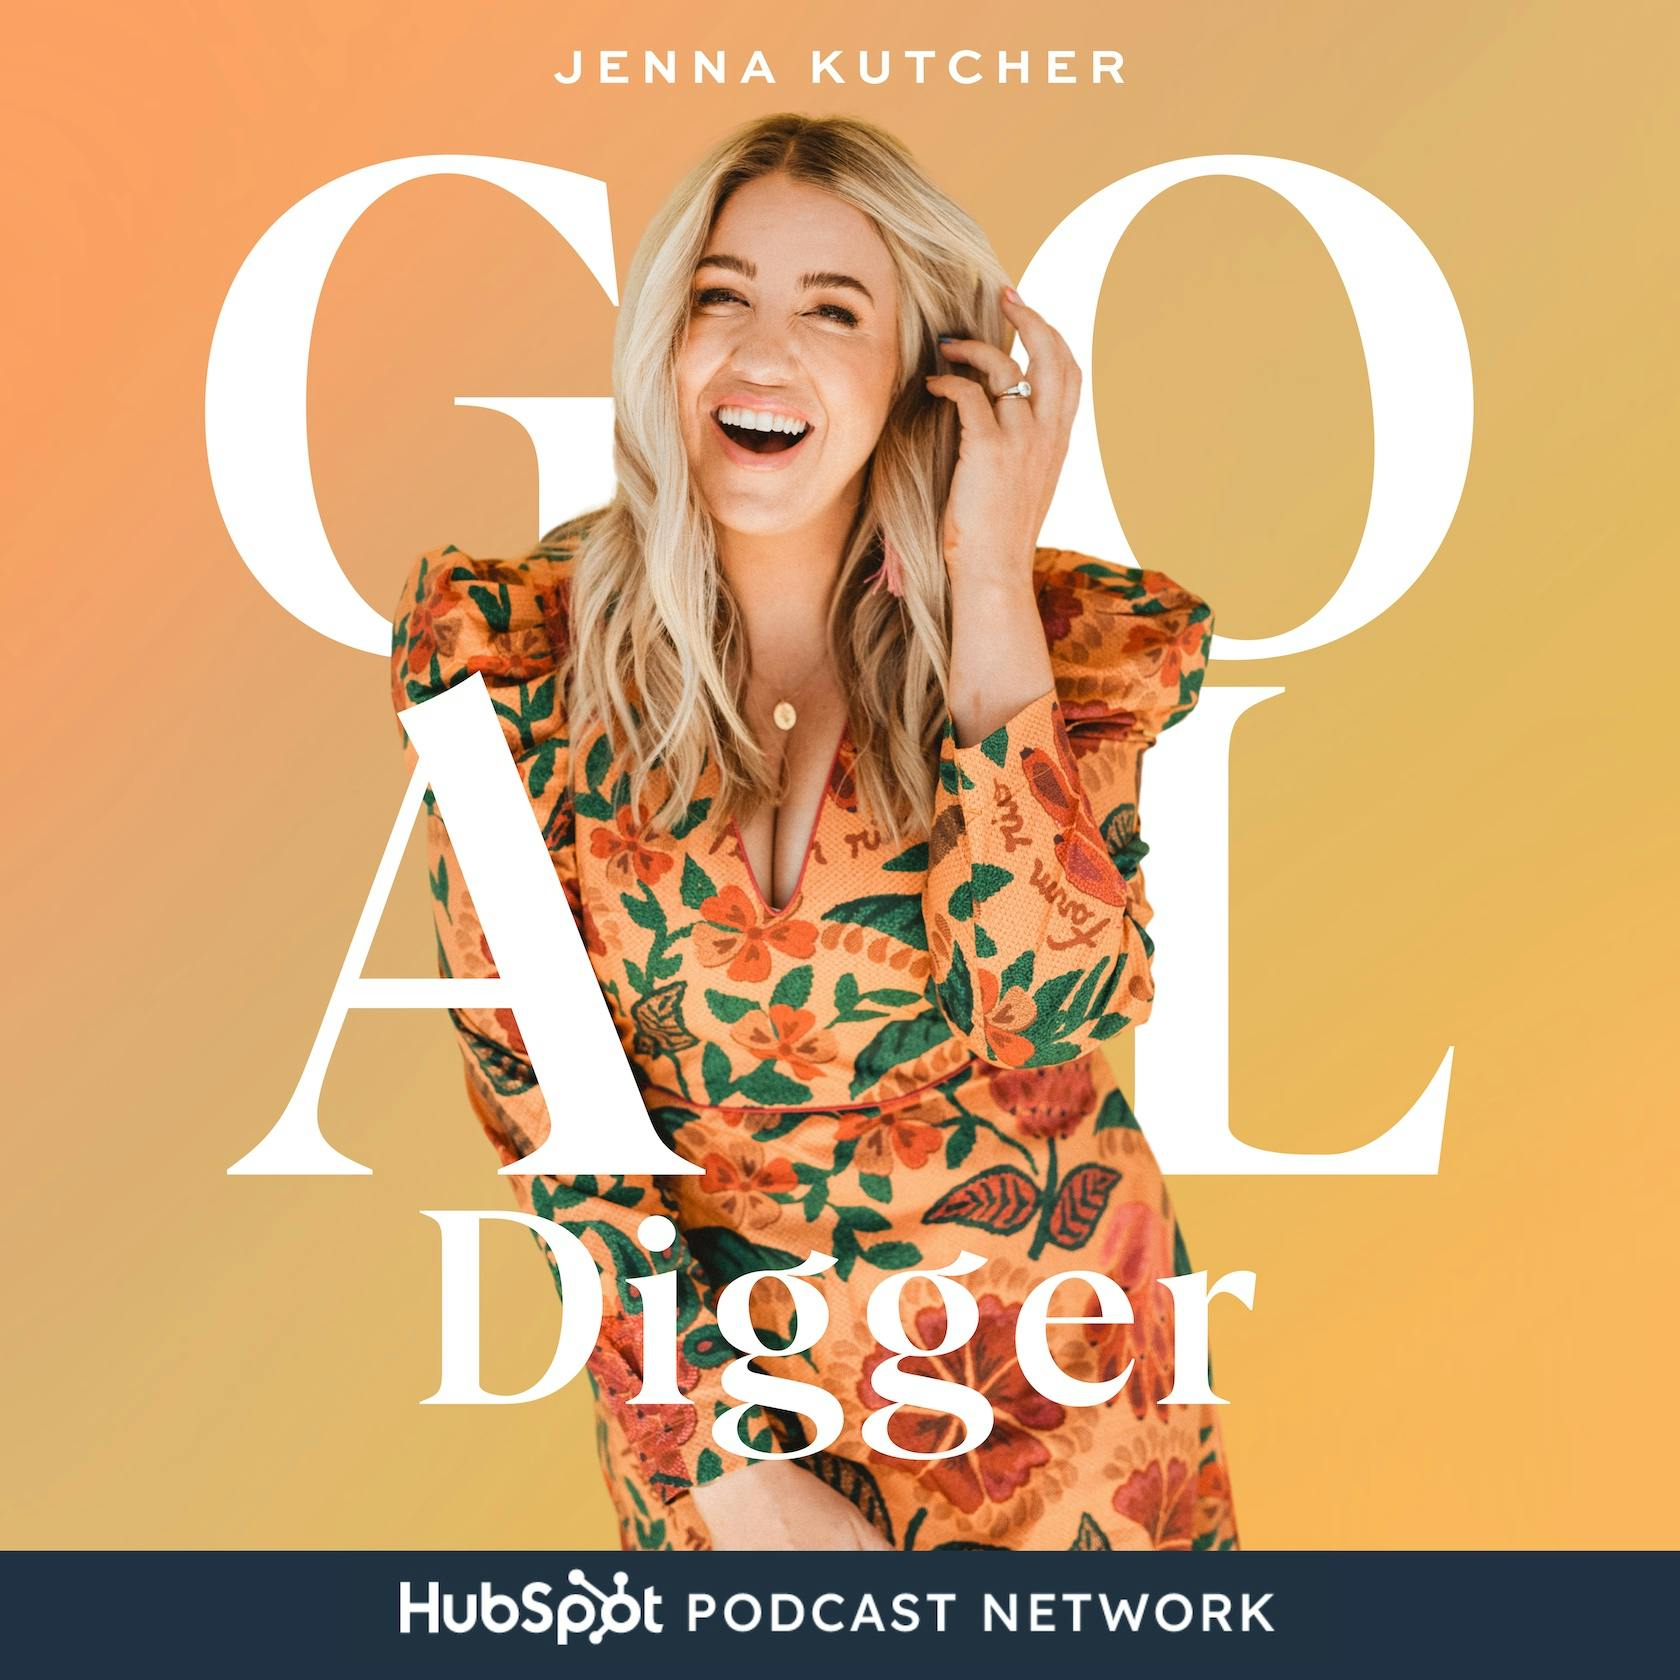 636: The 5 Major Areas You'll Improve if You Tune into Goal Digger This Year